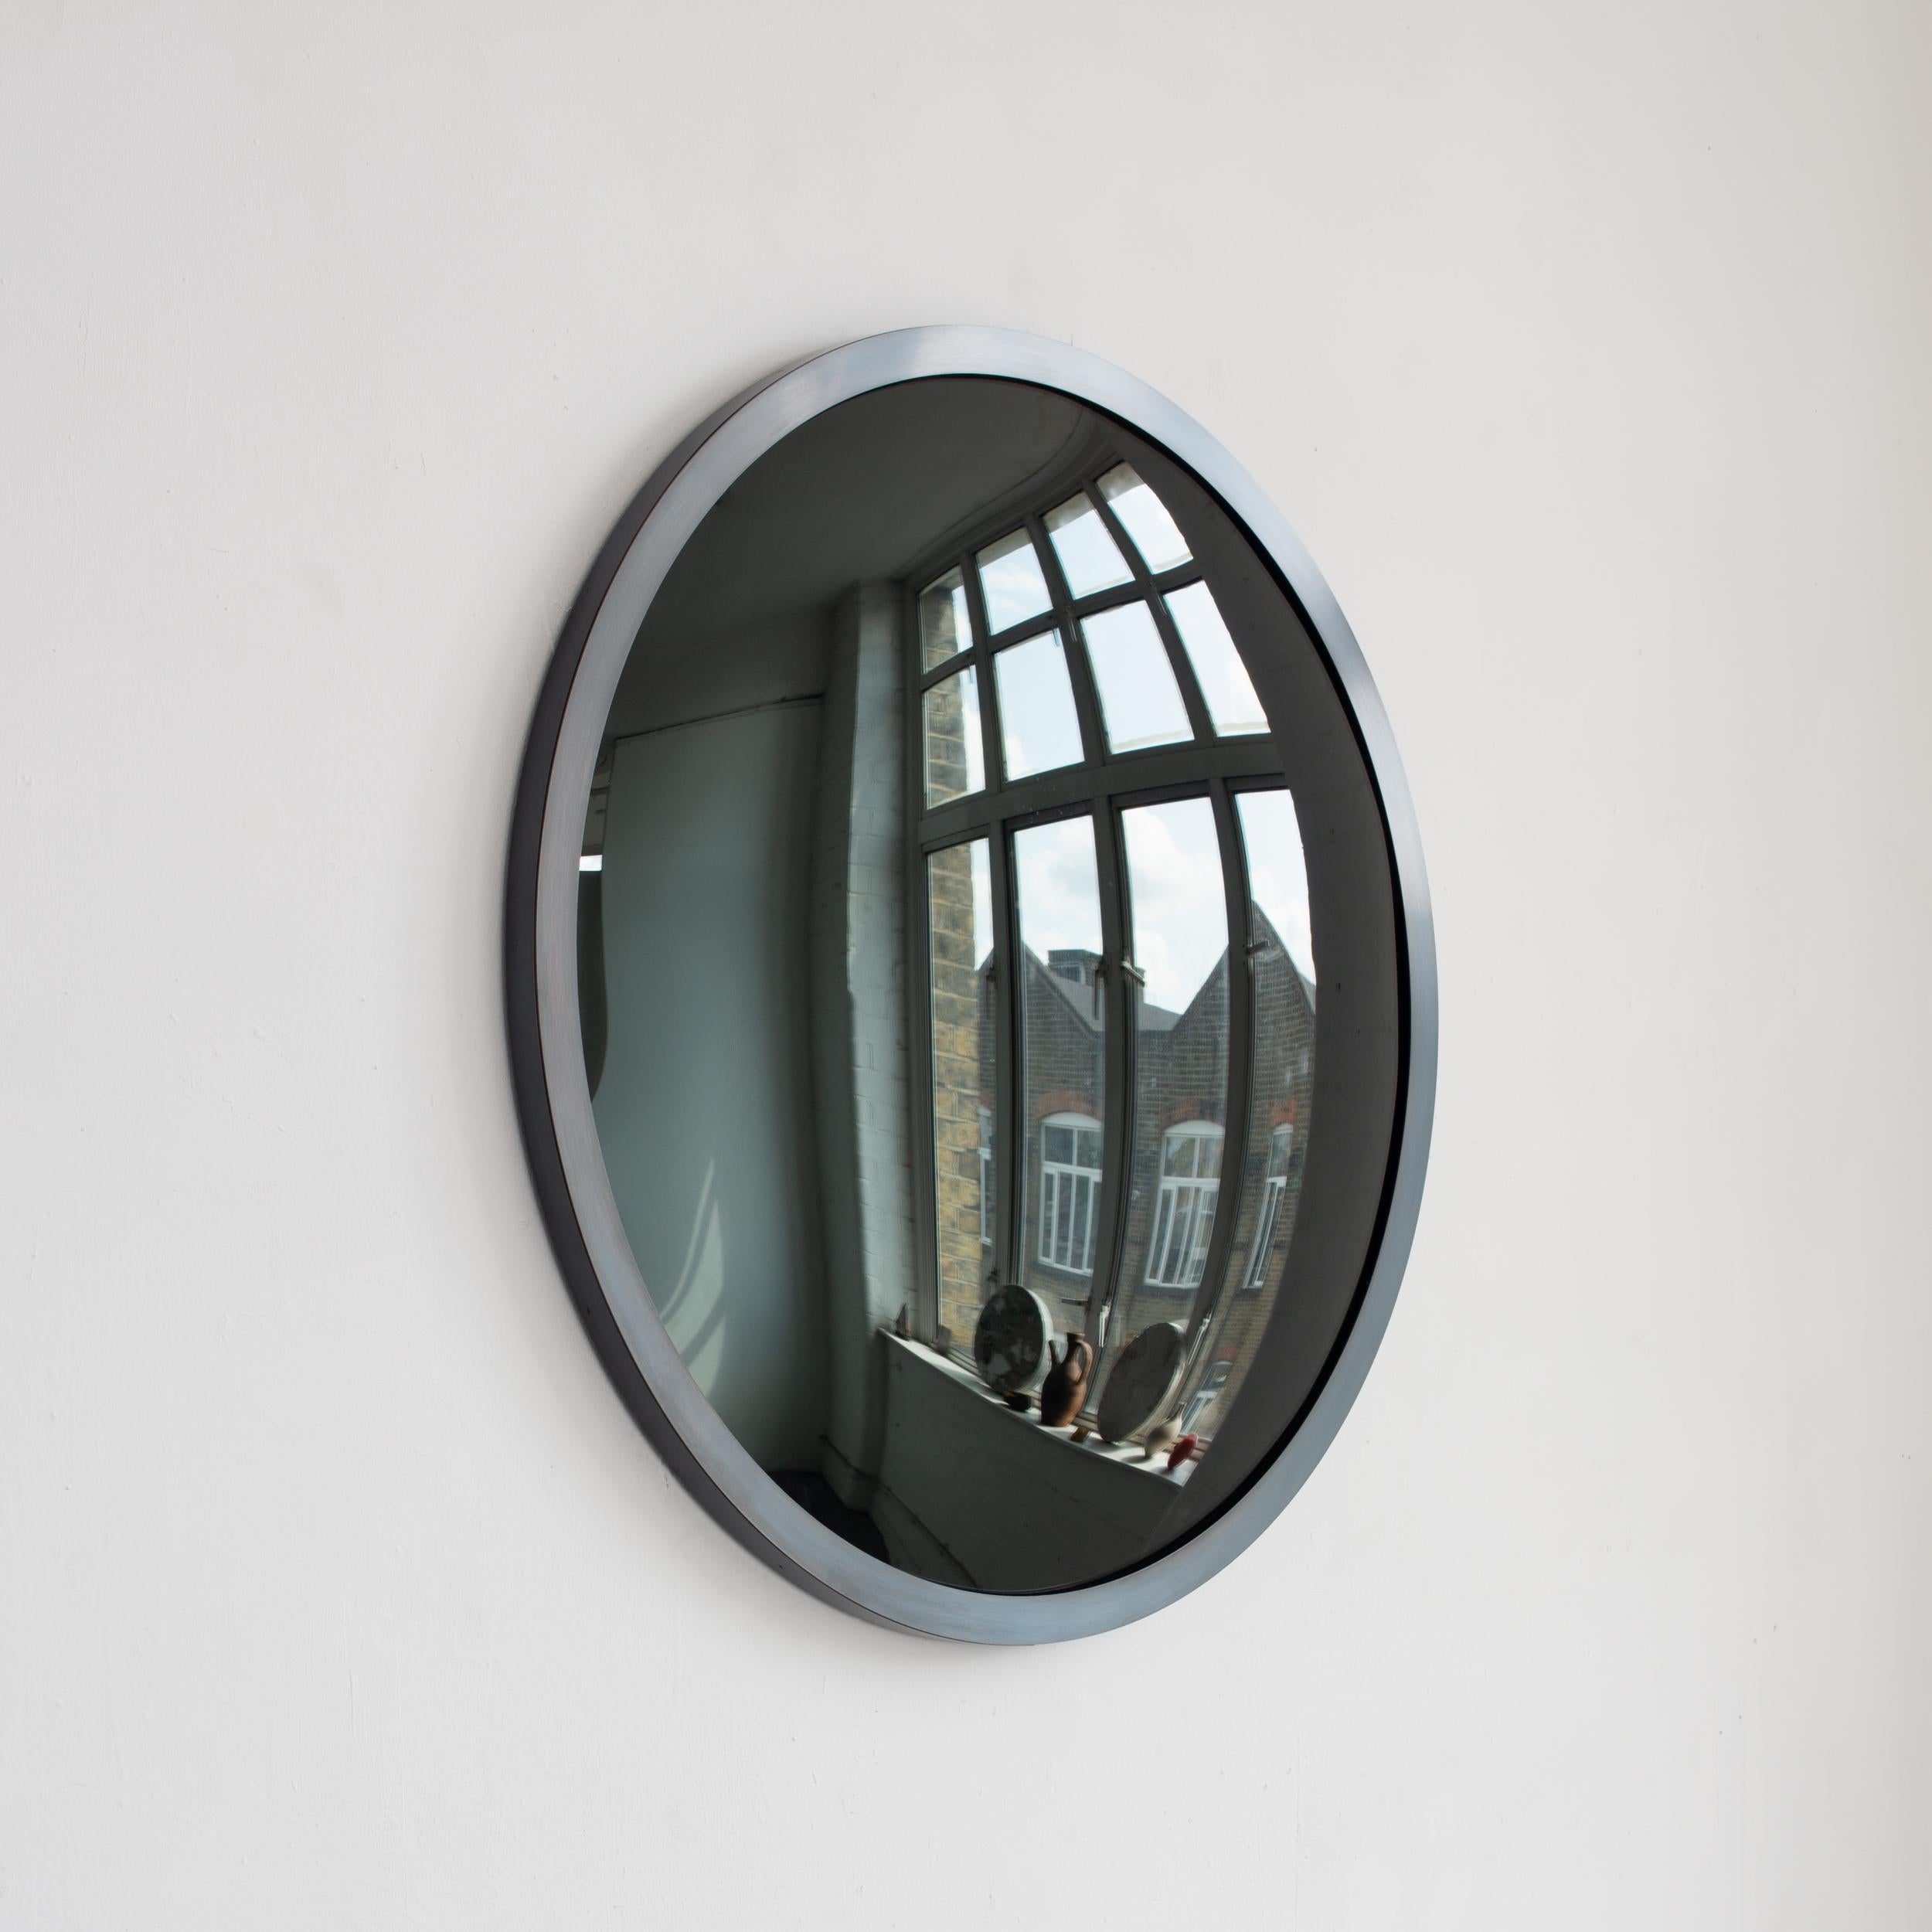 Stunning convex black tinted mirror with a blackened metal frame.

Each Orbis™ convex mirror is designed and handcrafted in London, UK. Slight variations in sizes and imperfections on edges and surface finishes are characteristics of such original